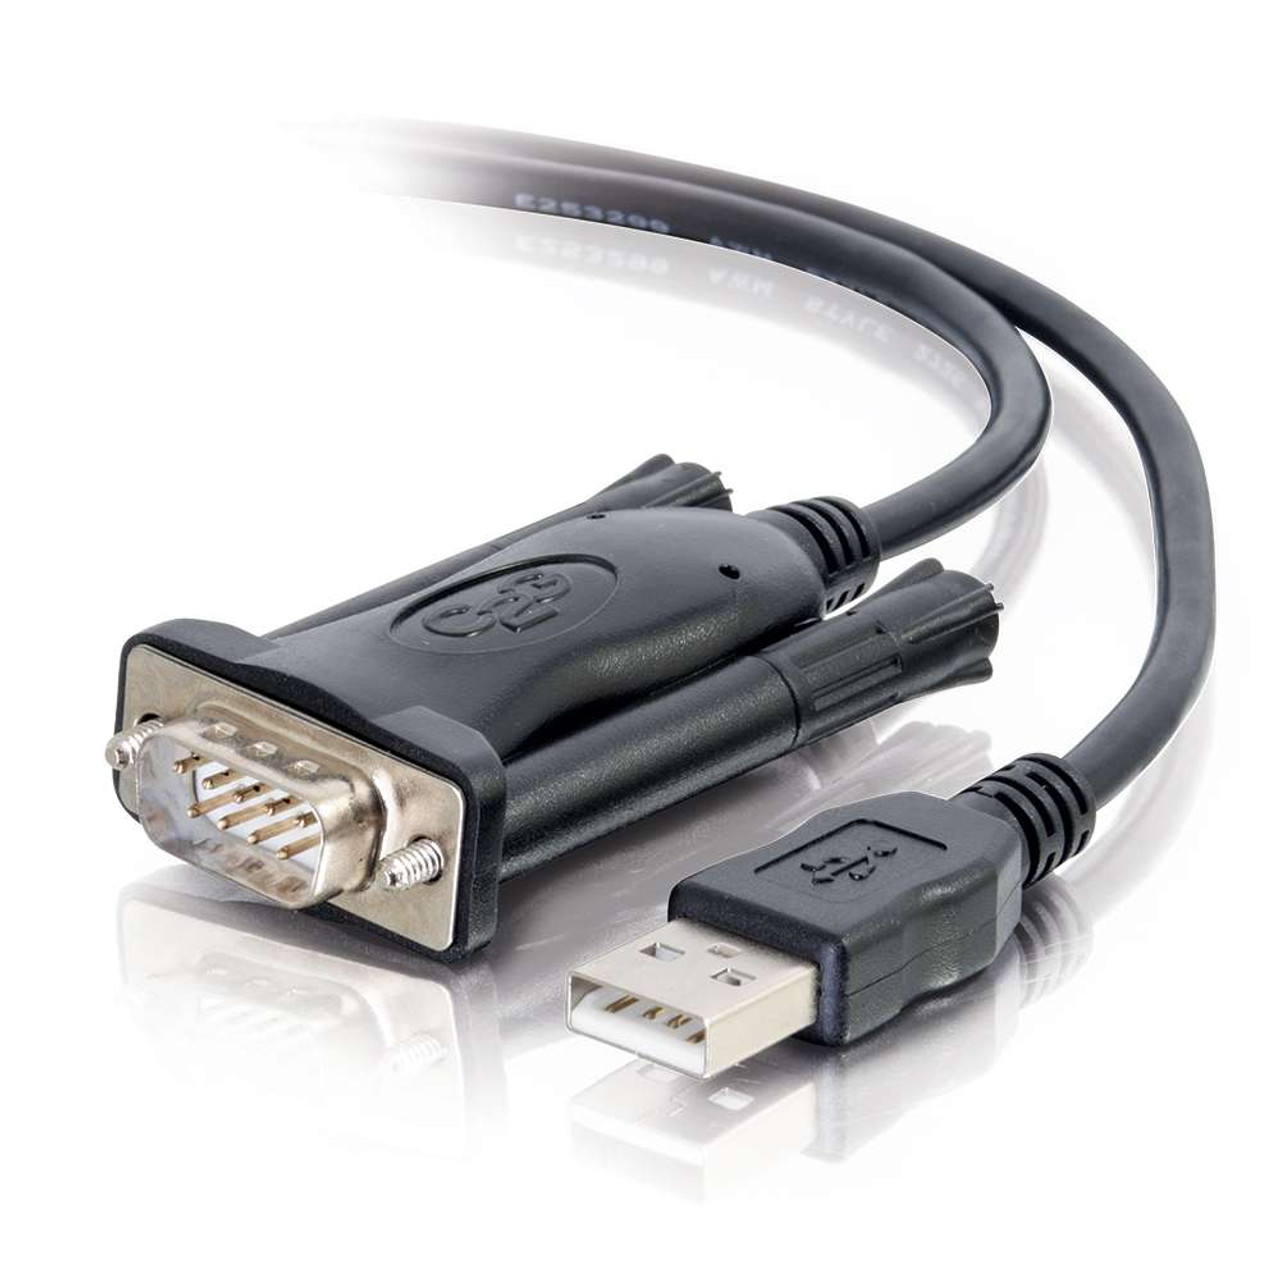 USB DB9 Serial RS232 Cable | AV Cables